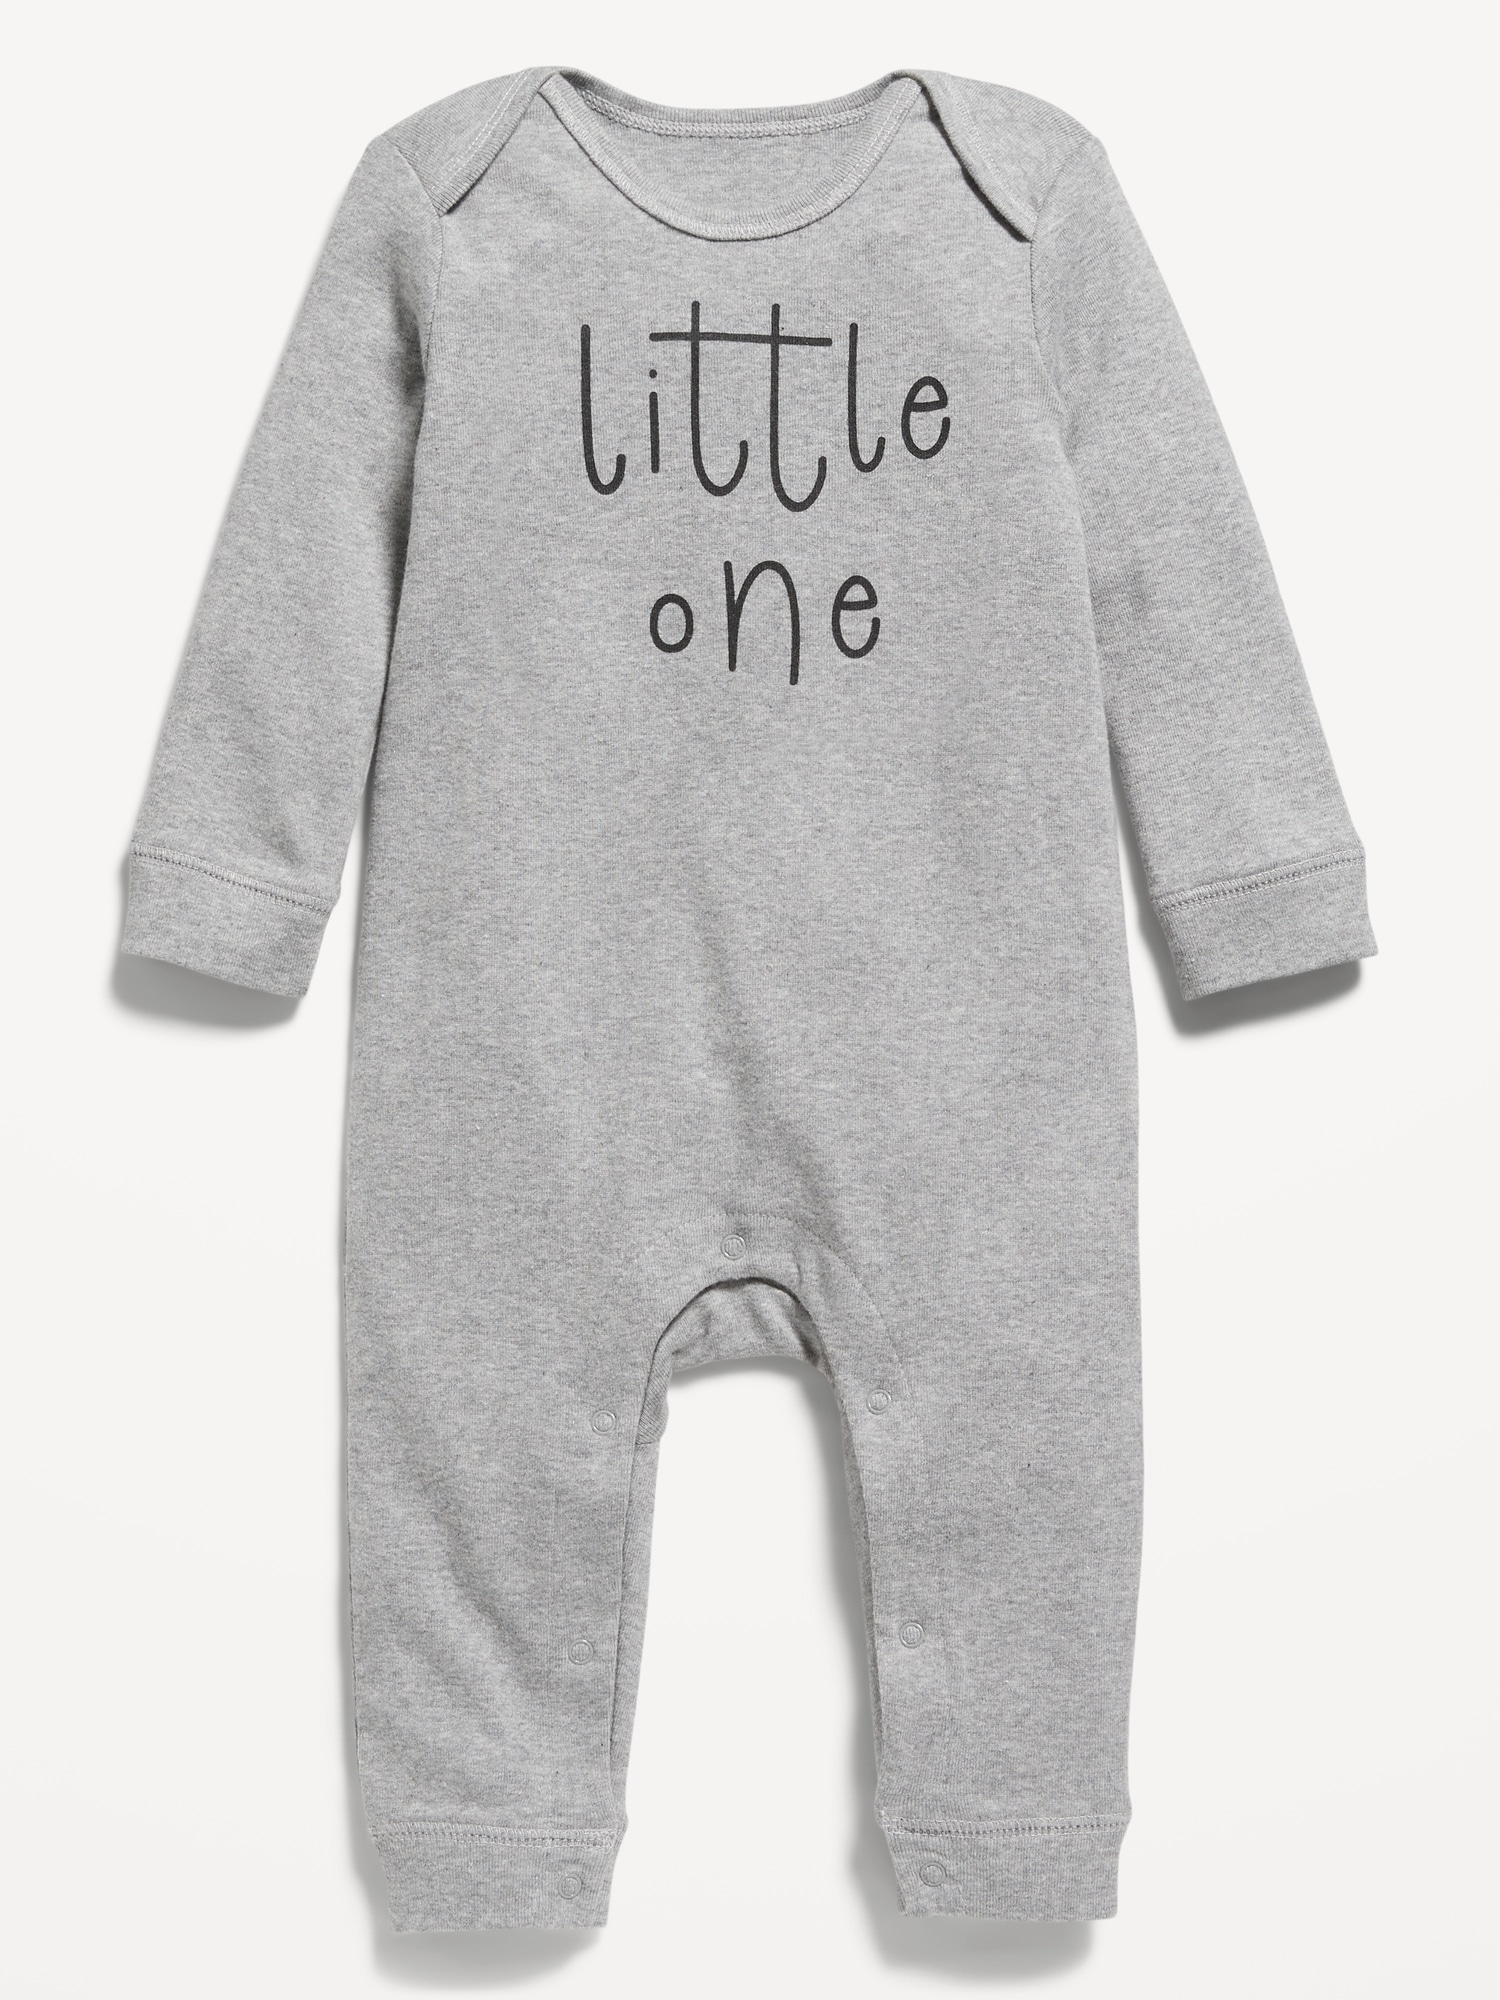 Unisex Organic-Cotton Graphic One-Piece for Baby